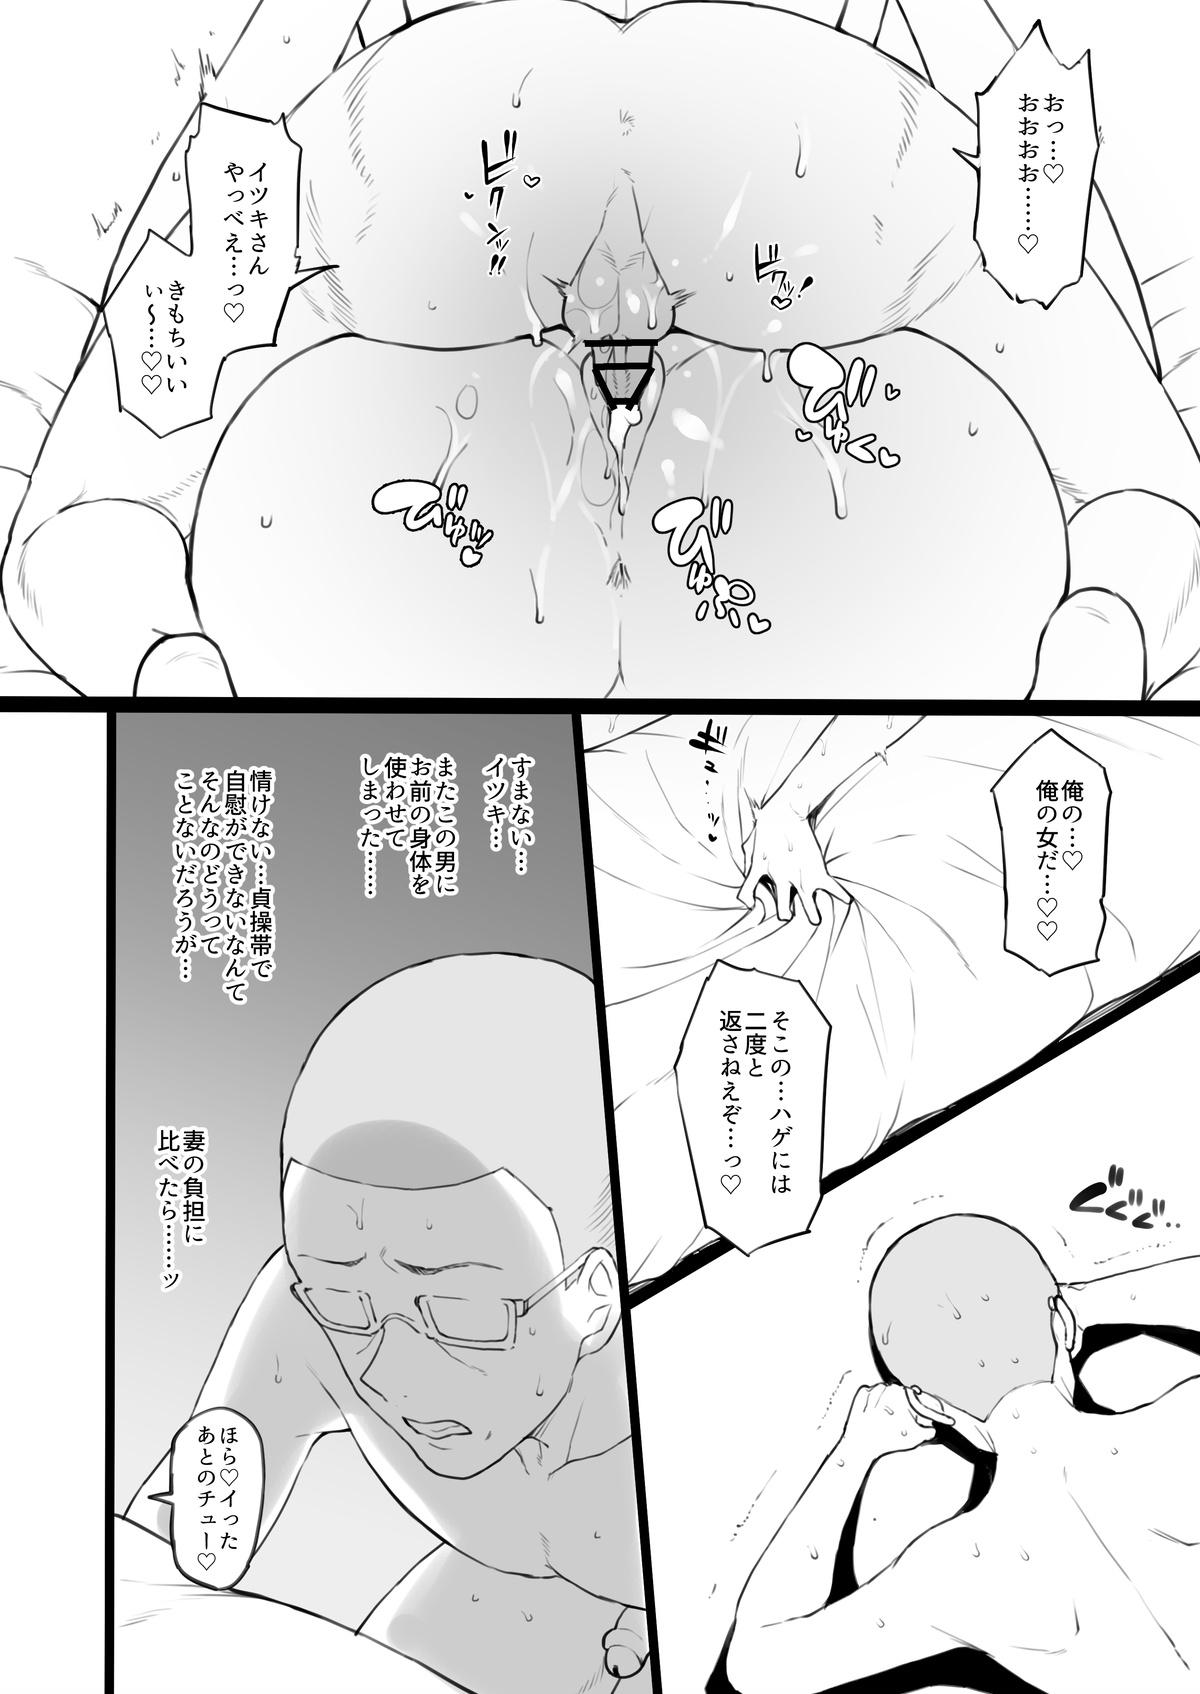 Transexual 奴隷家族 Leche - Page 12